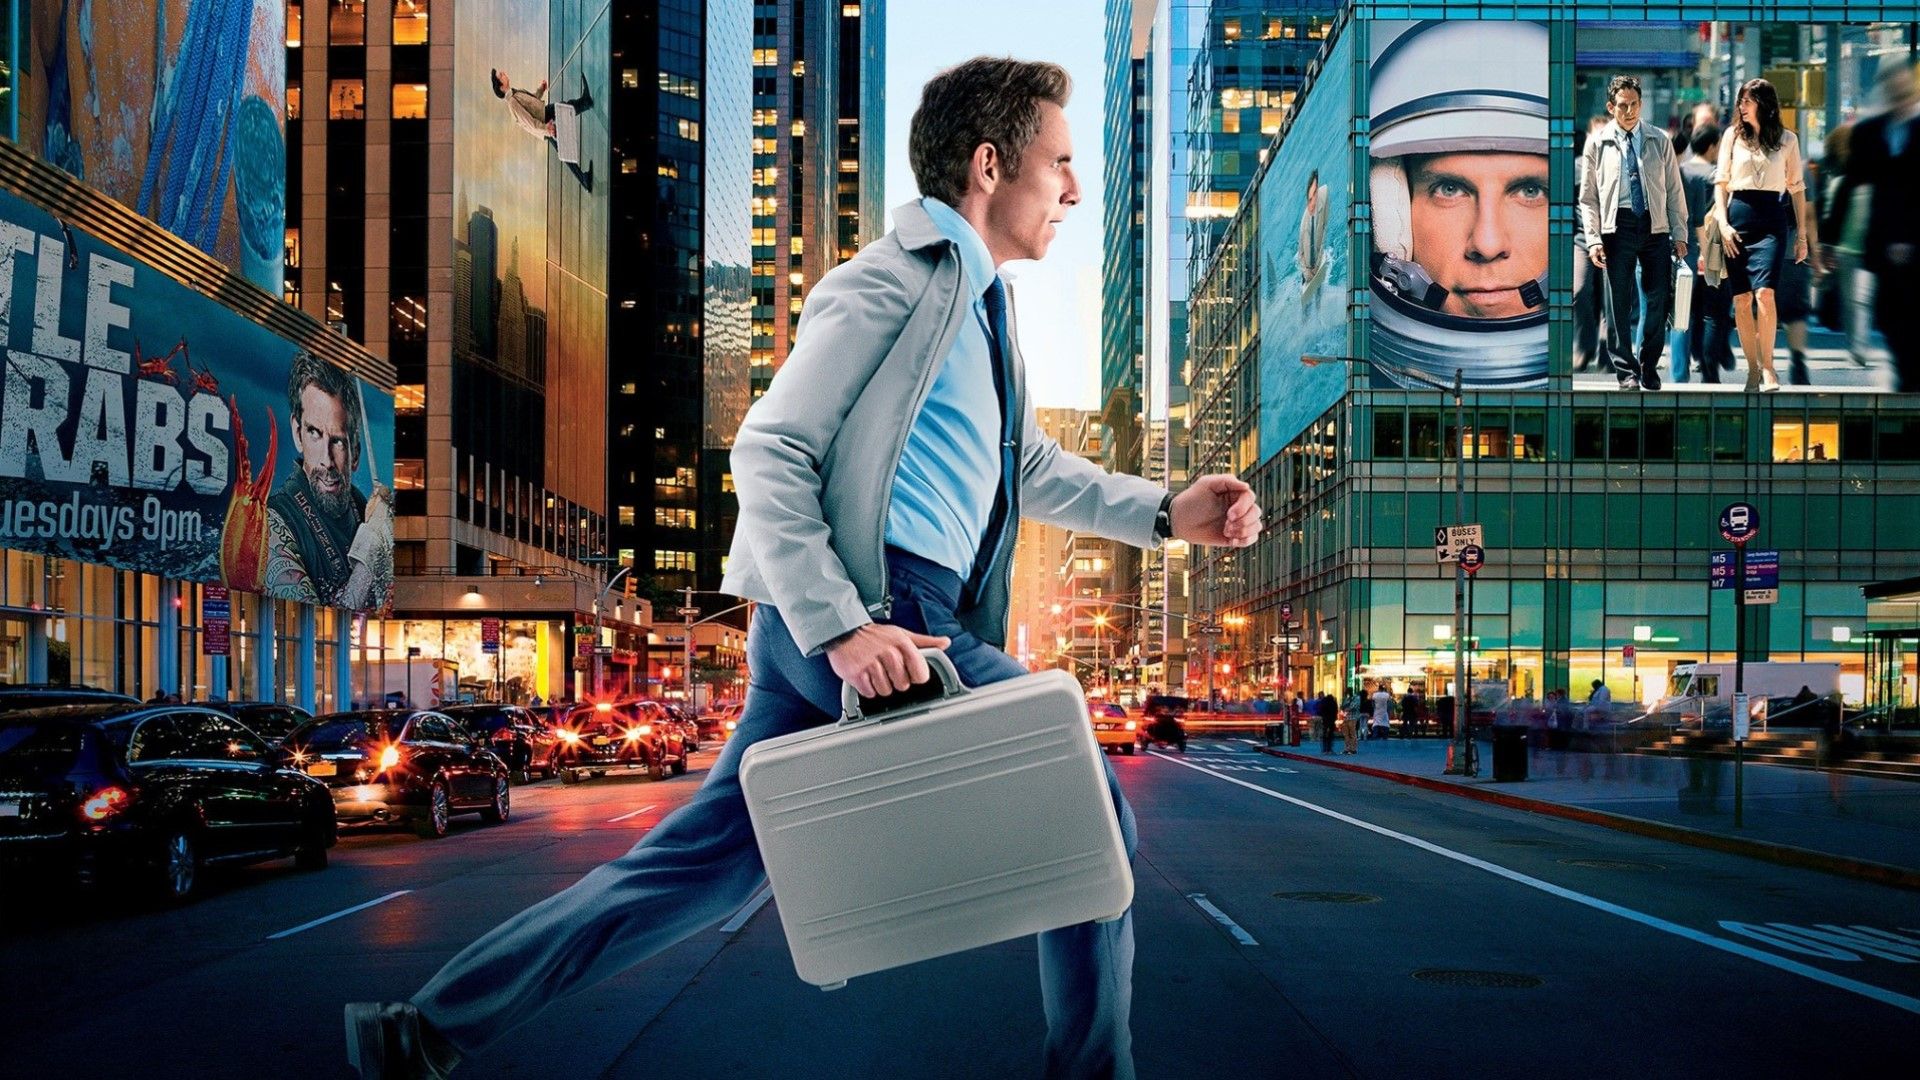 The Secret Life of Walter Mitty background